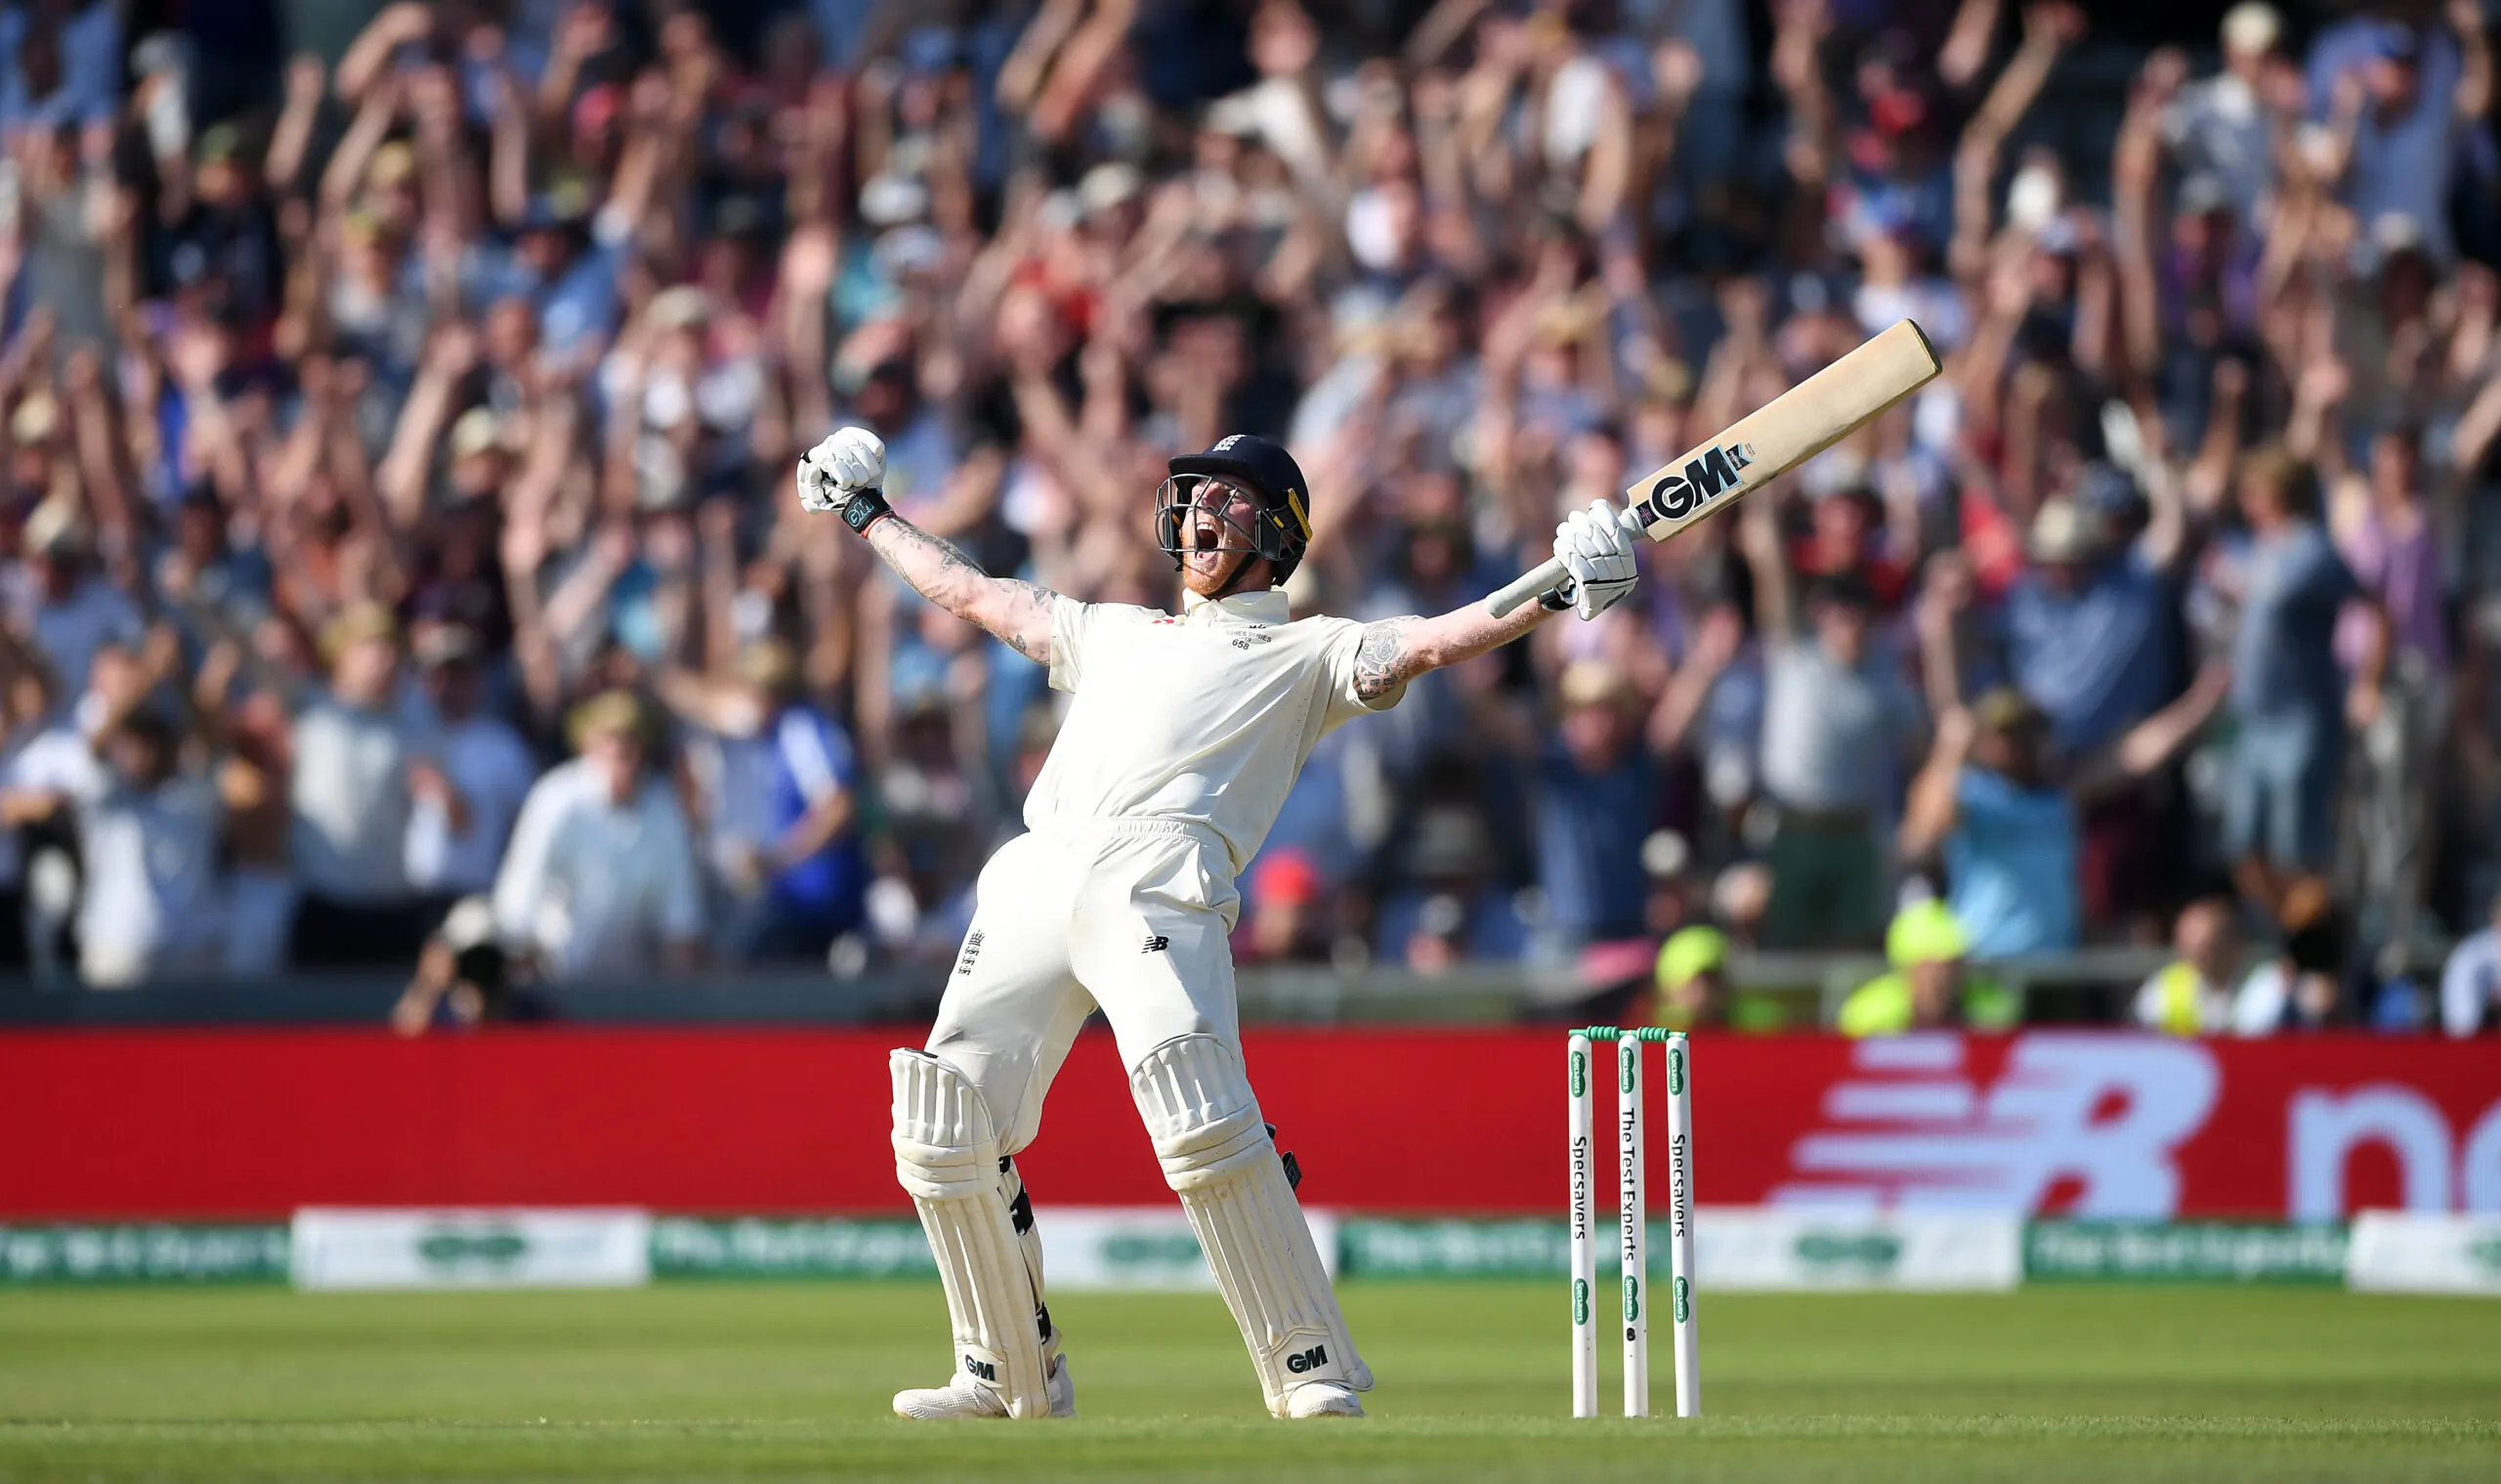 Stokes' Headingley Heroics comes out on top in public poll Yorkshire